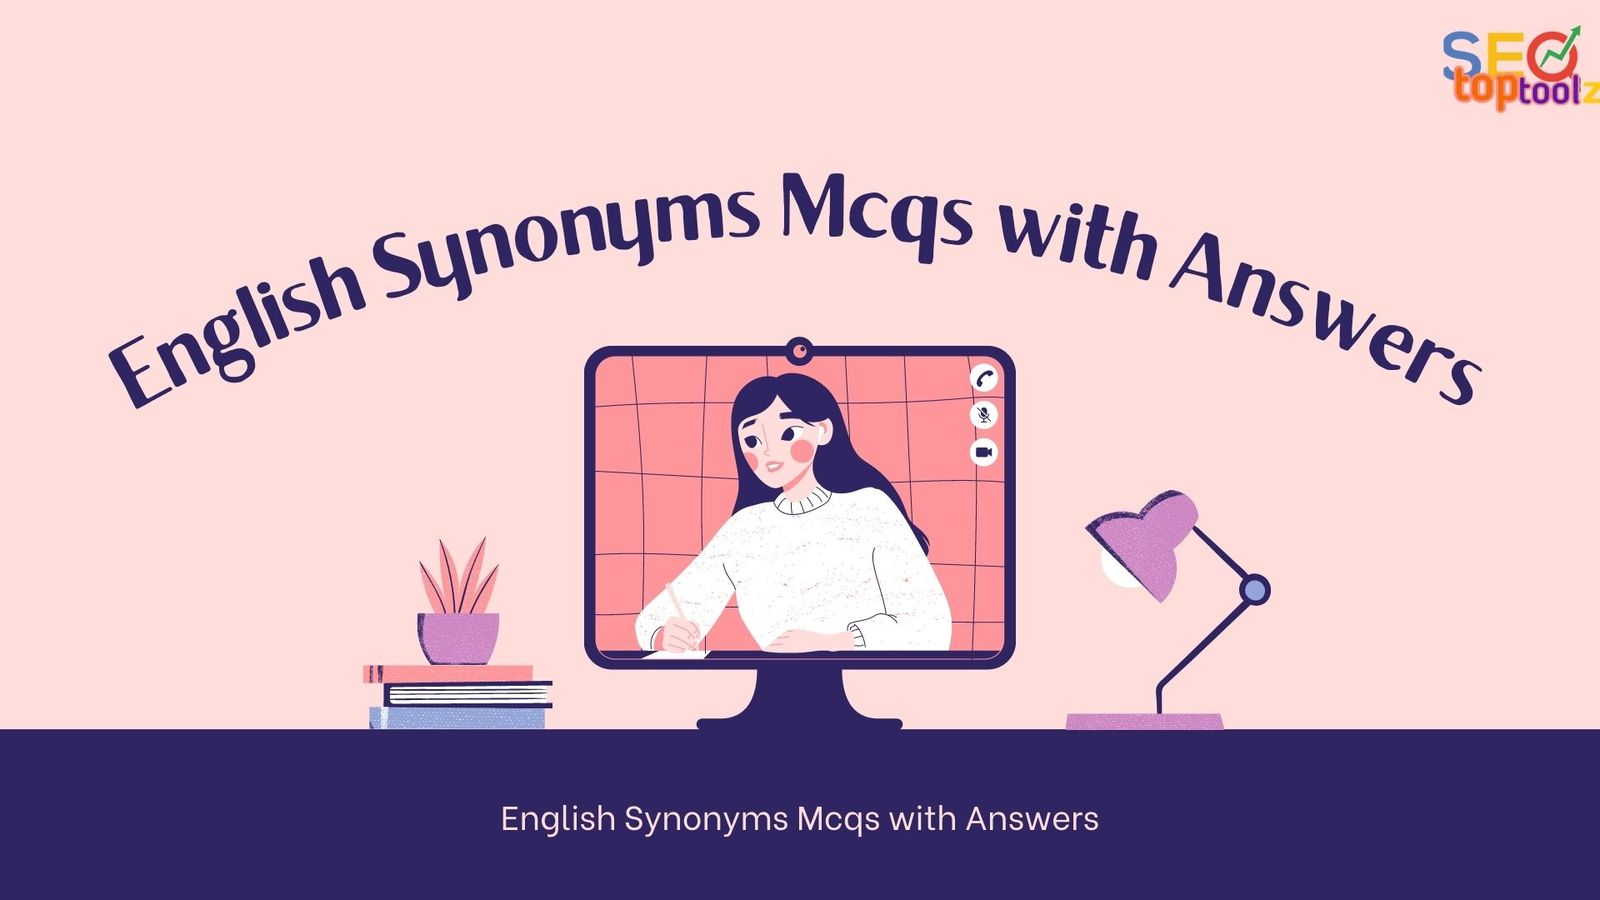 english-synonyms-mcqs-with-answers-seotoptoolz